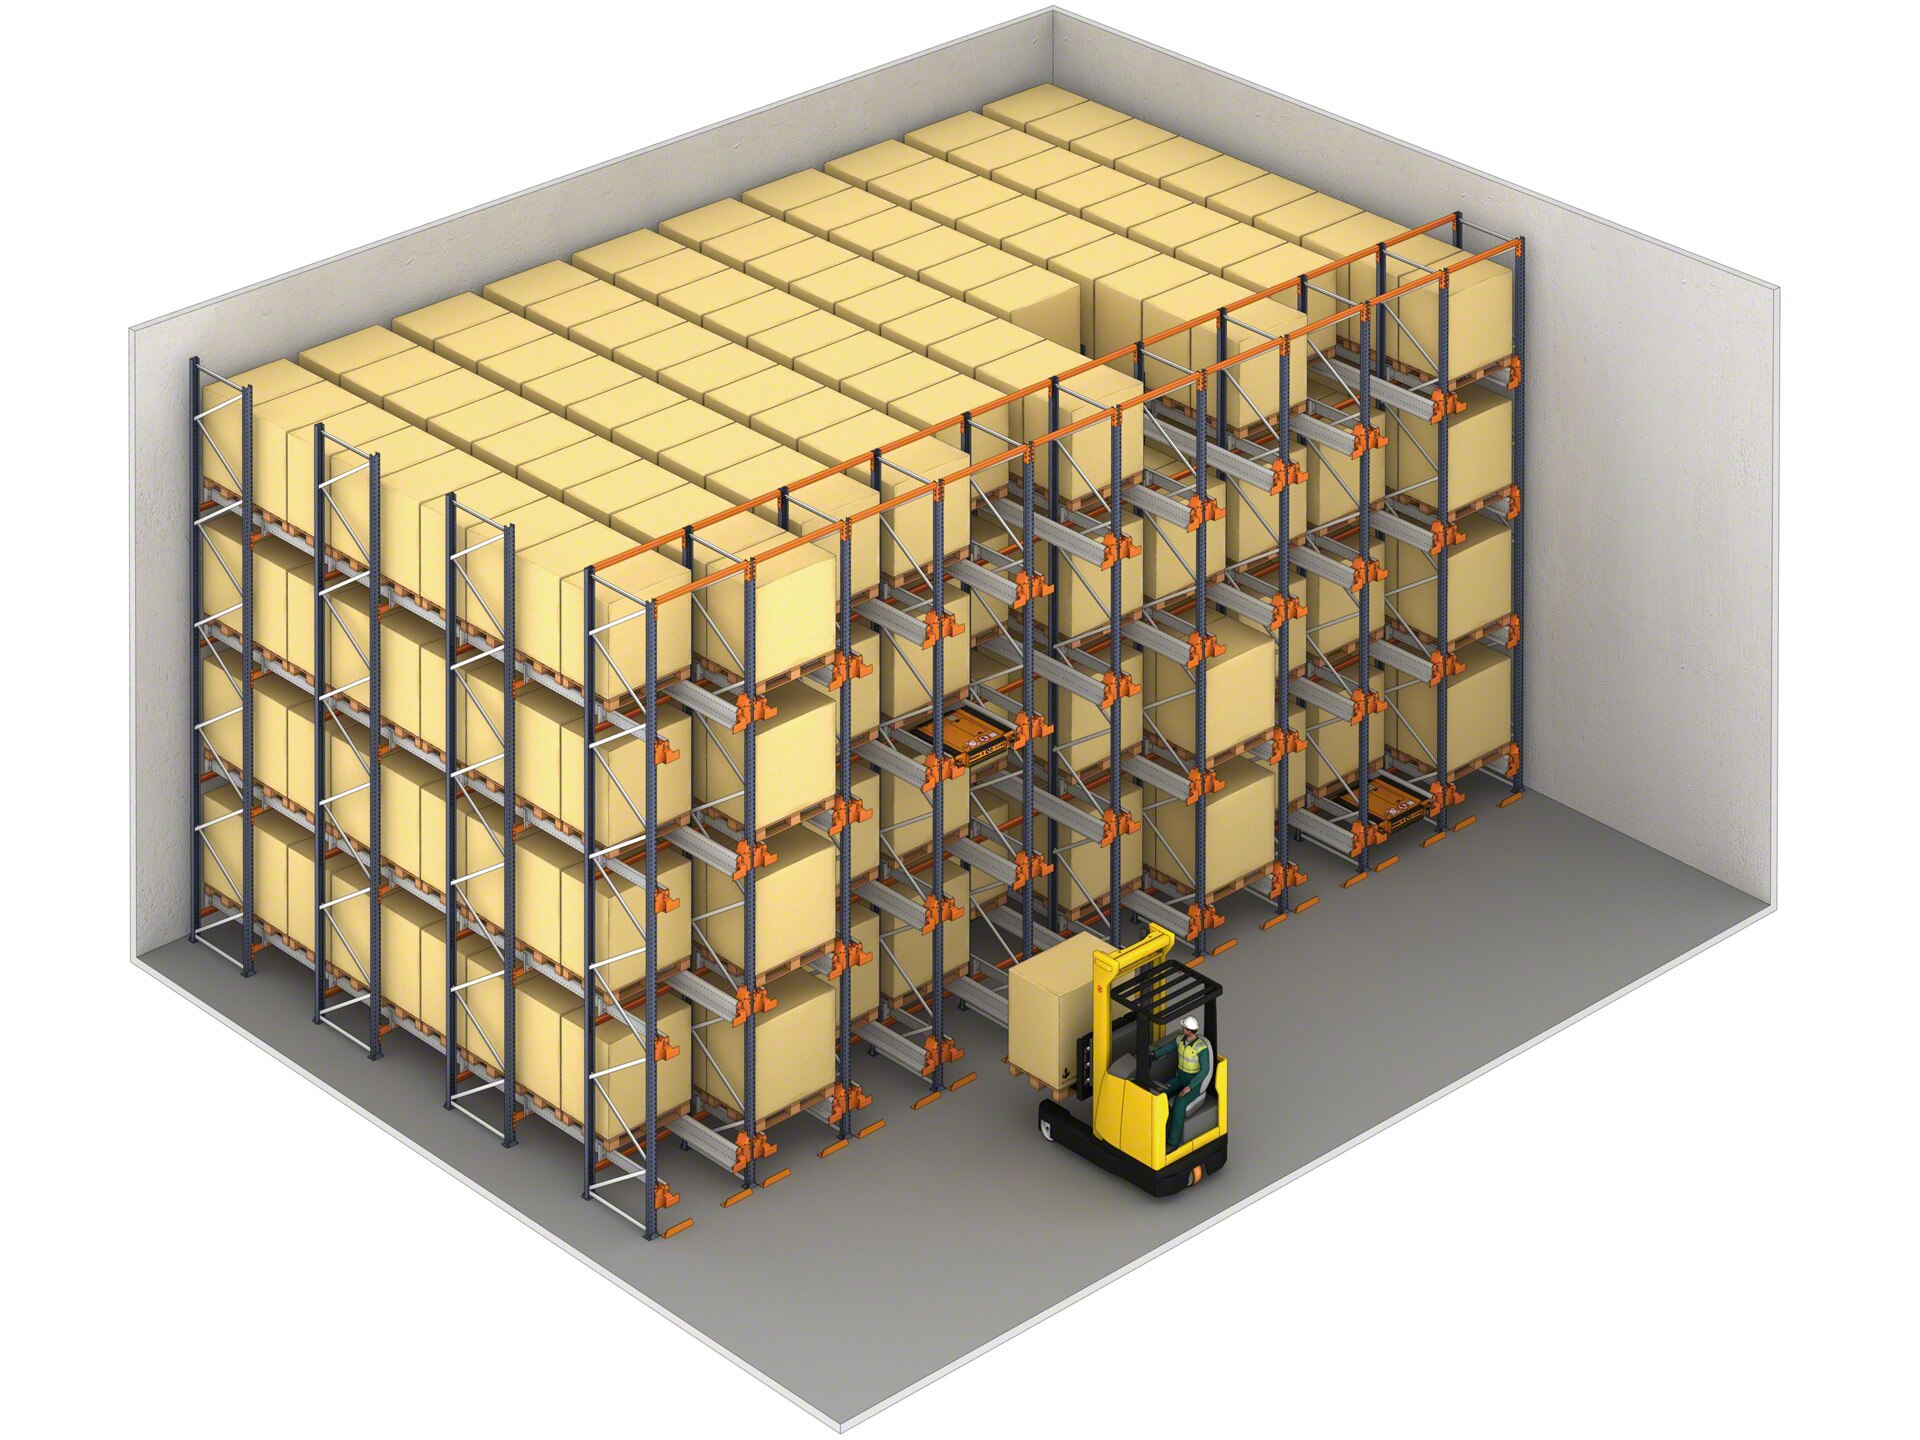 With just one command, the Pallet Shuttle can continuously fill an entire lane